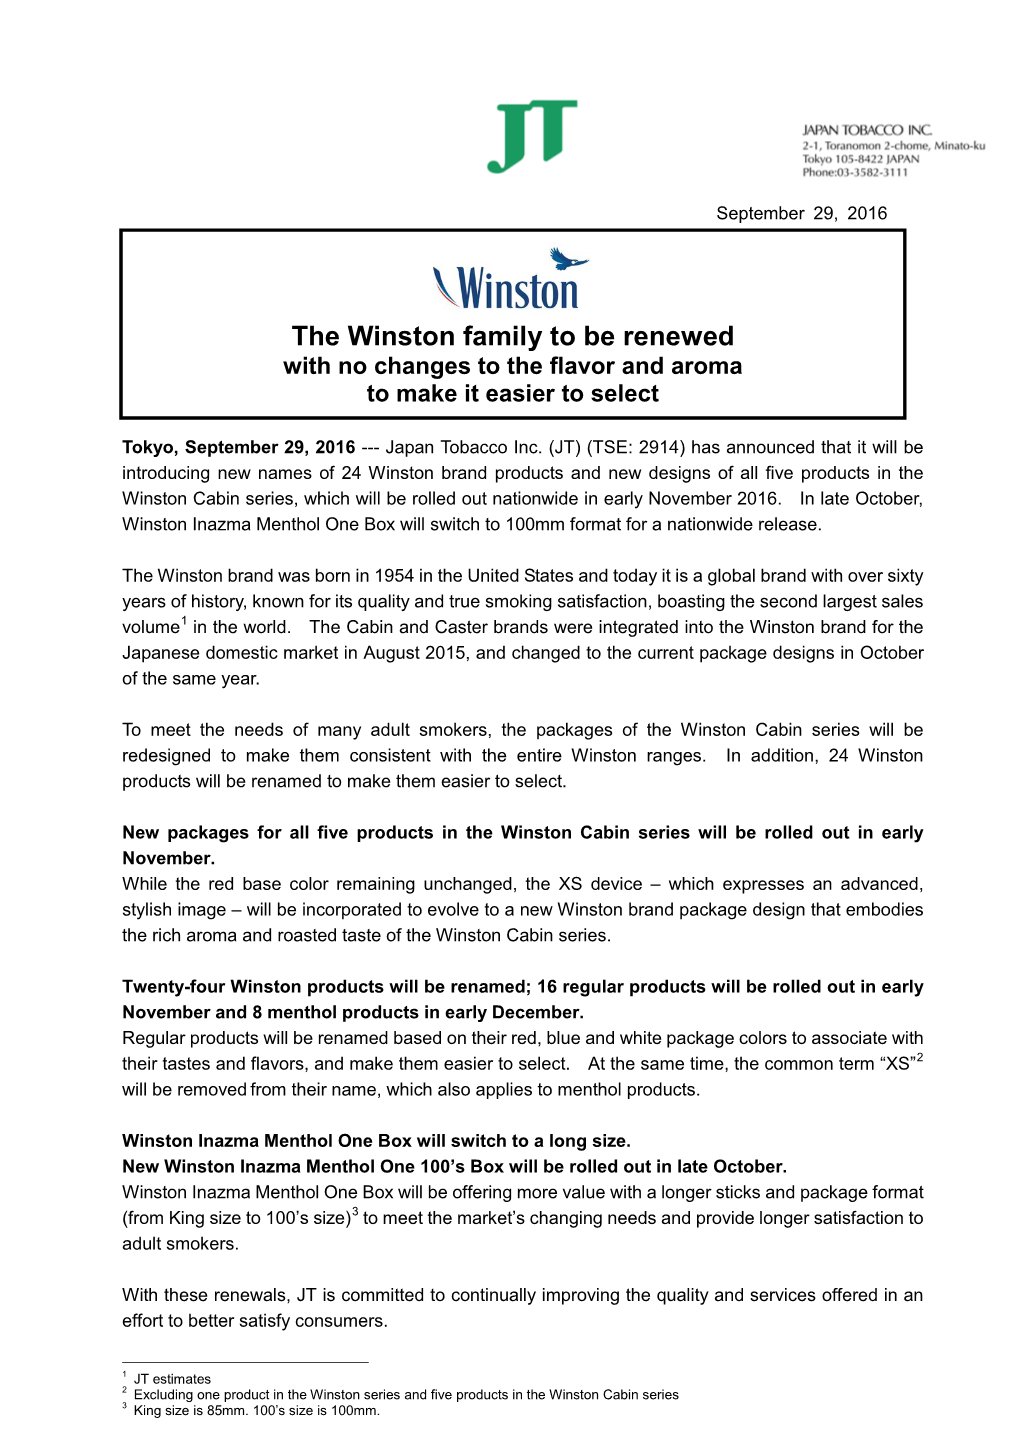 The Winston Family to Be Renewed with No Changes to the Flavor and Aroma to Make It Easier to Select